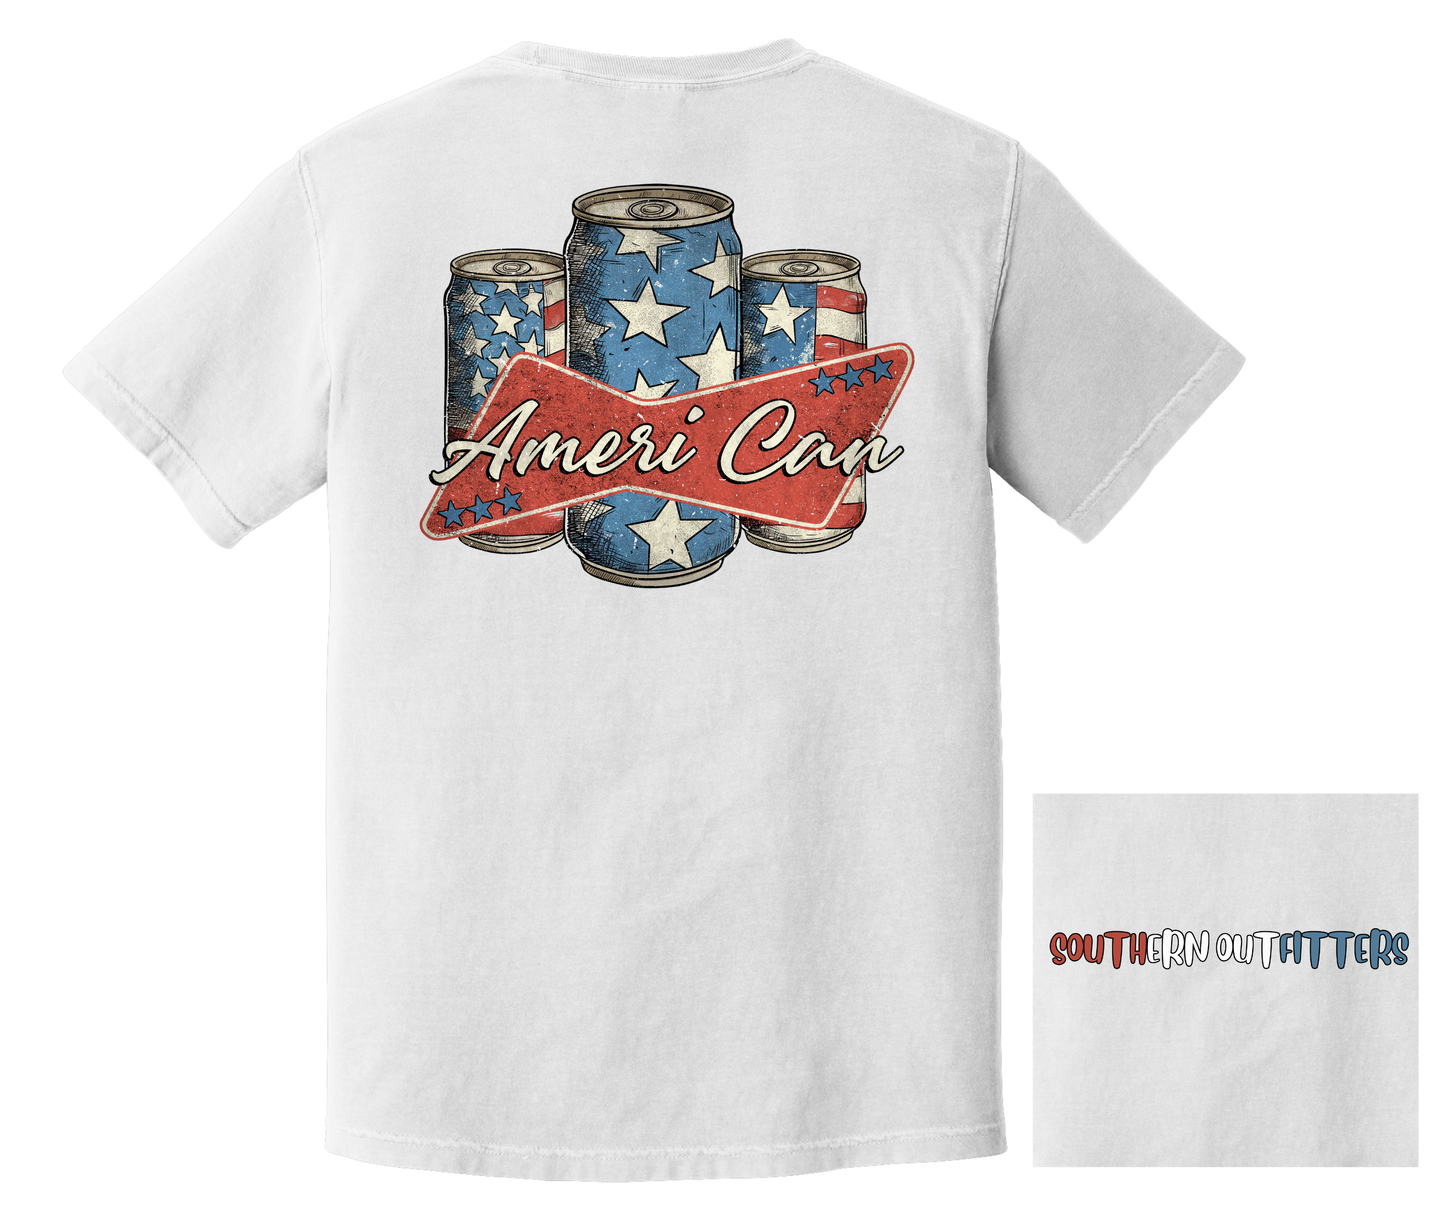 Ameri Can - Southern Outfitters